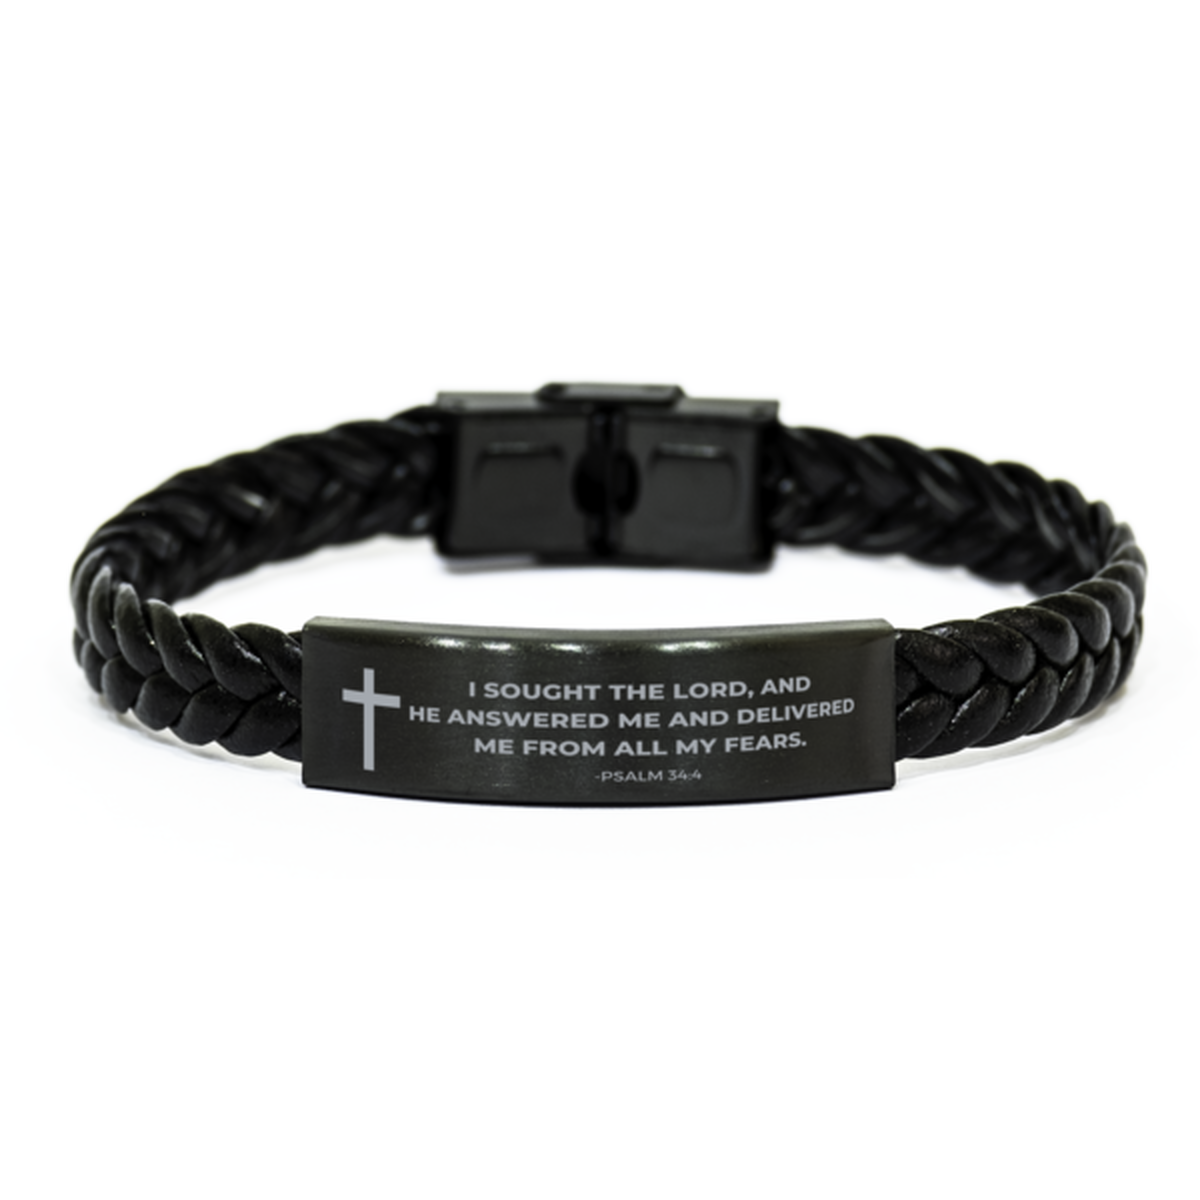 Baptism Gifts For Teenage Boys Girls, Christian Bible Verse Braided Leather Bracelet, I sought the Lord, Catholic Confirmation Gifts for Son, Godson, Grandson, Nephew